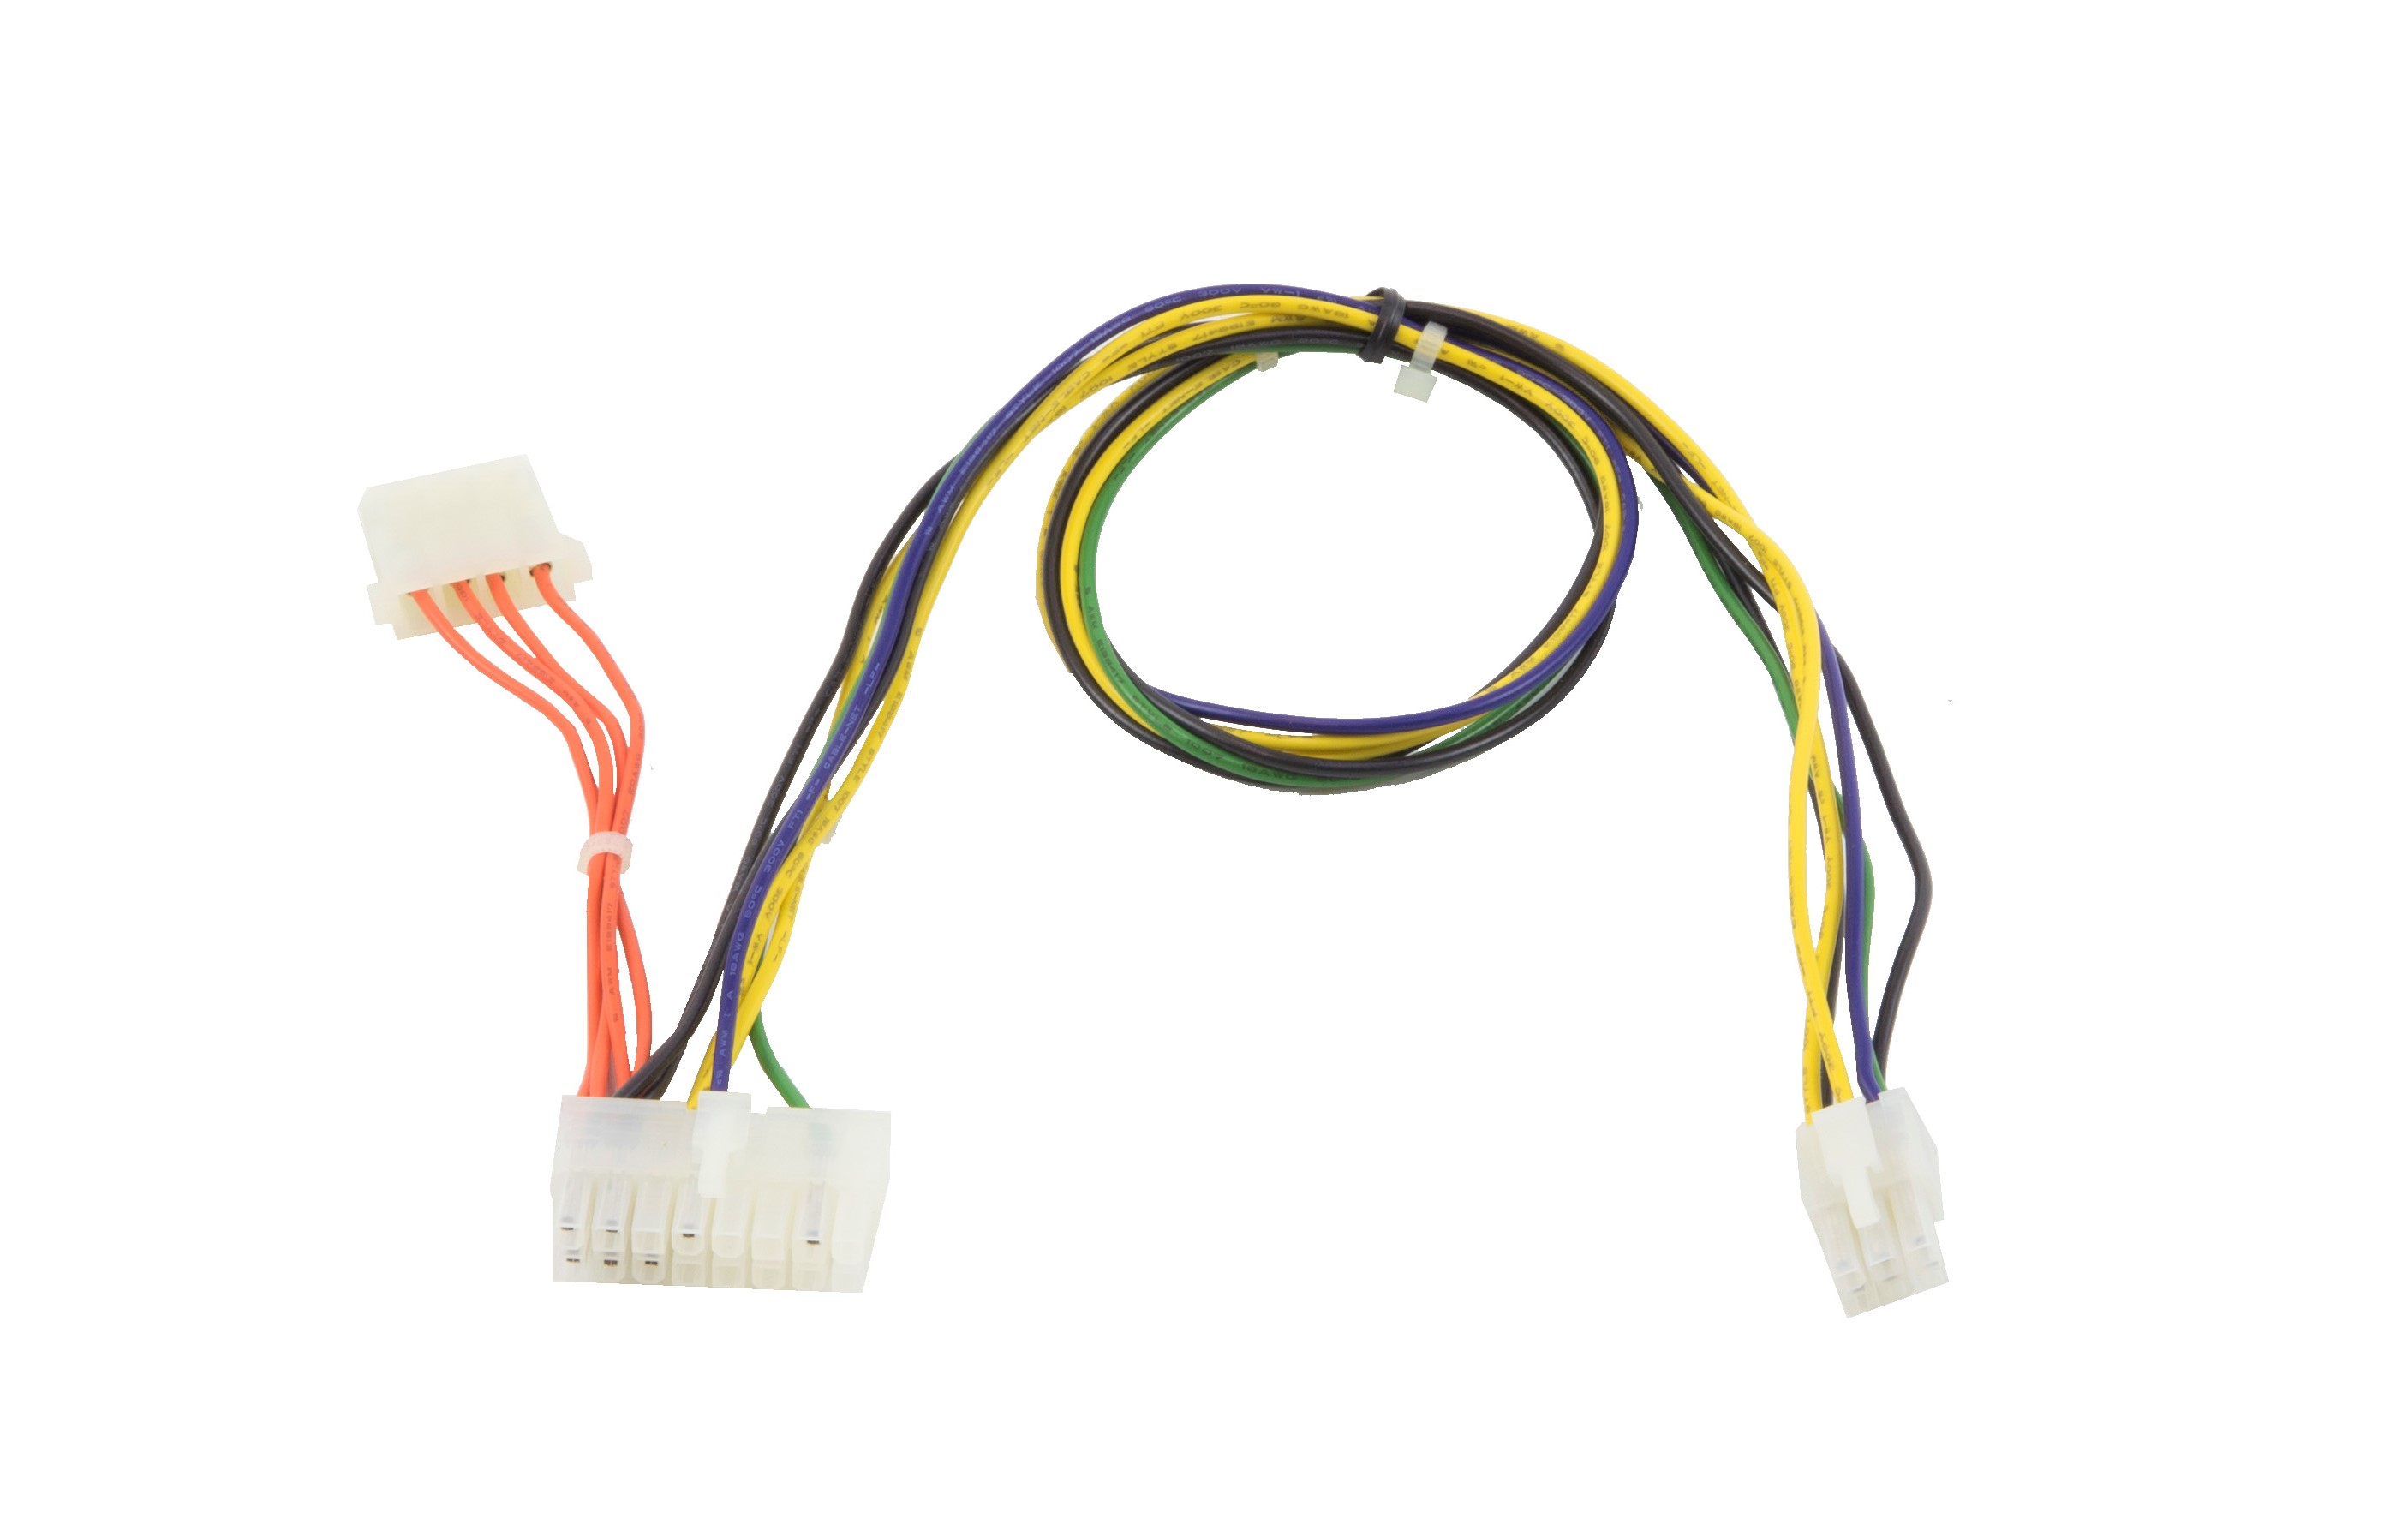 4-16-6 ATX CABLE  |Products|Accessories|Cable & Cord